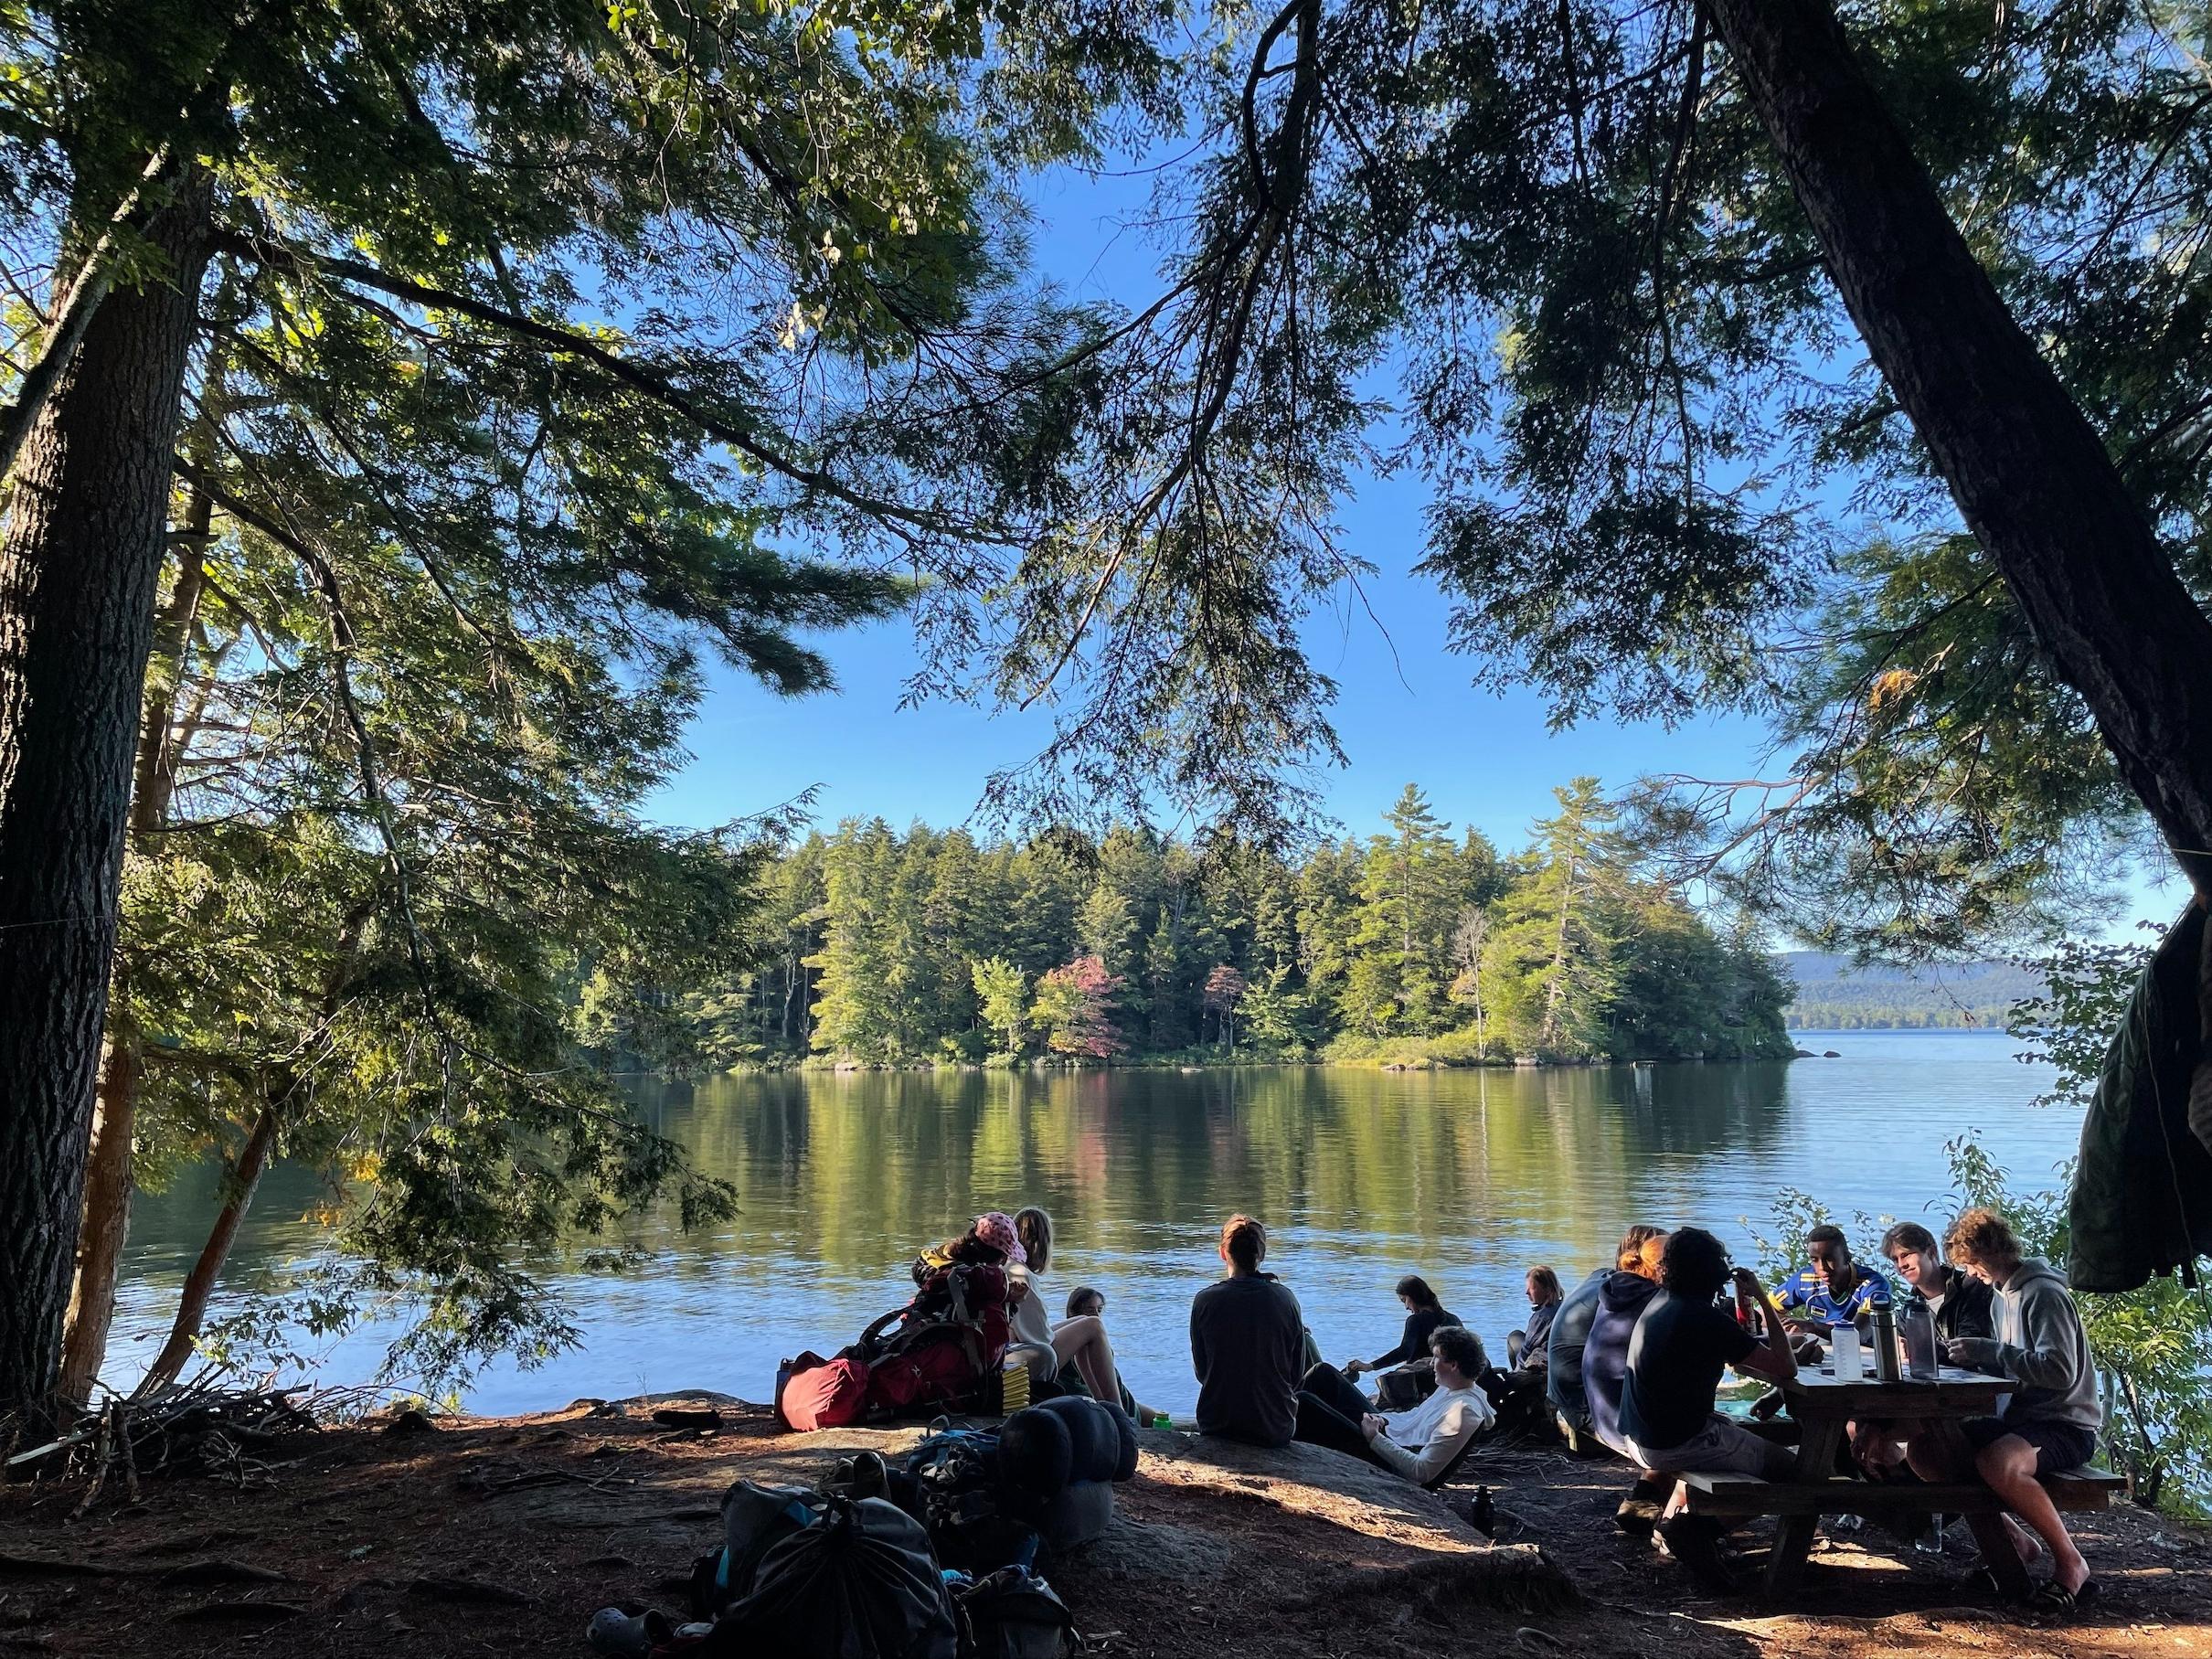 We see the backs of a group of students as they chat at a picnic table and look out across a lake.